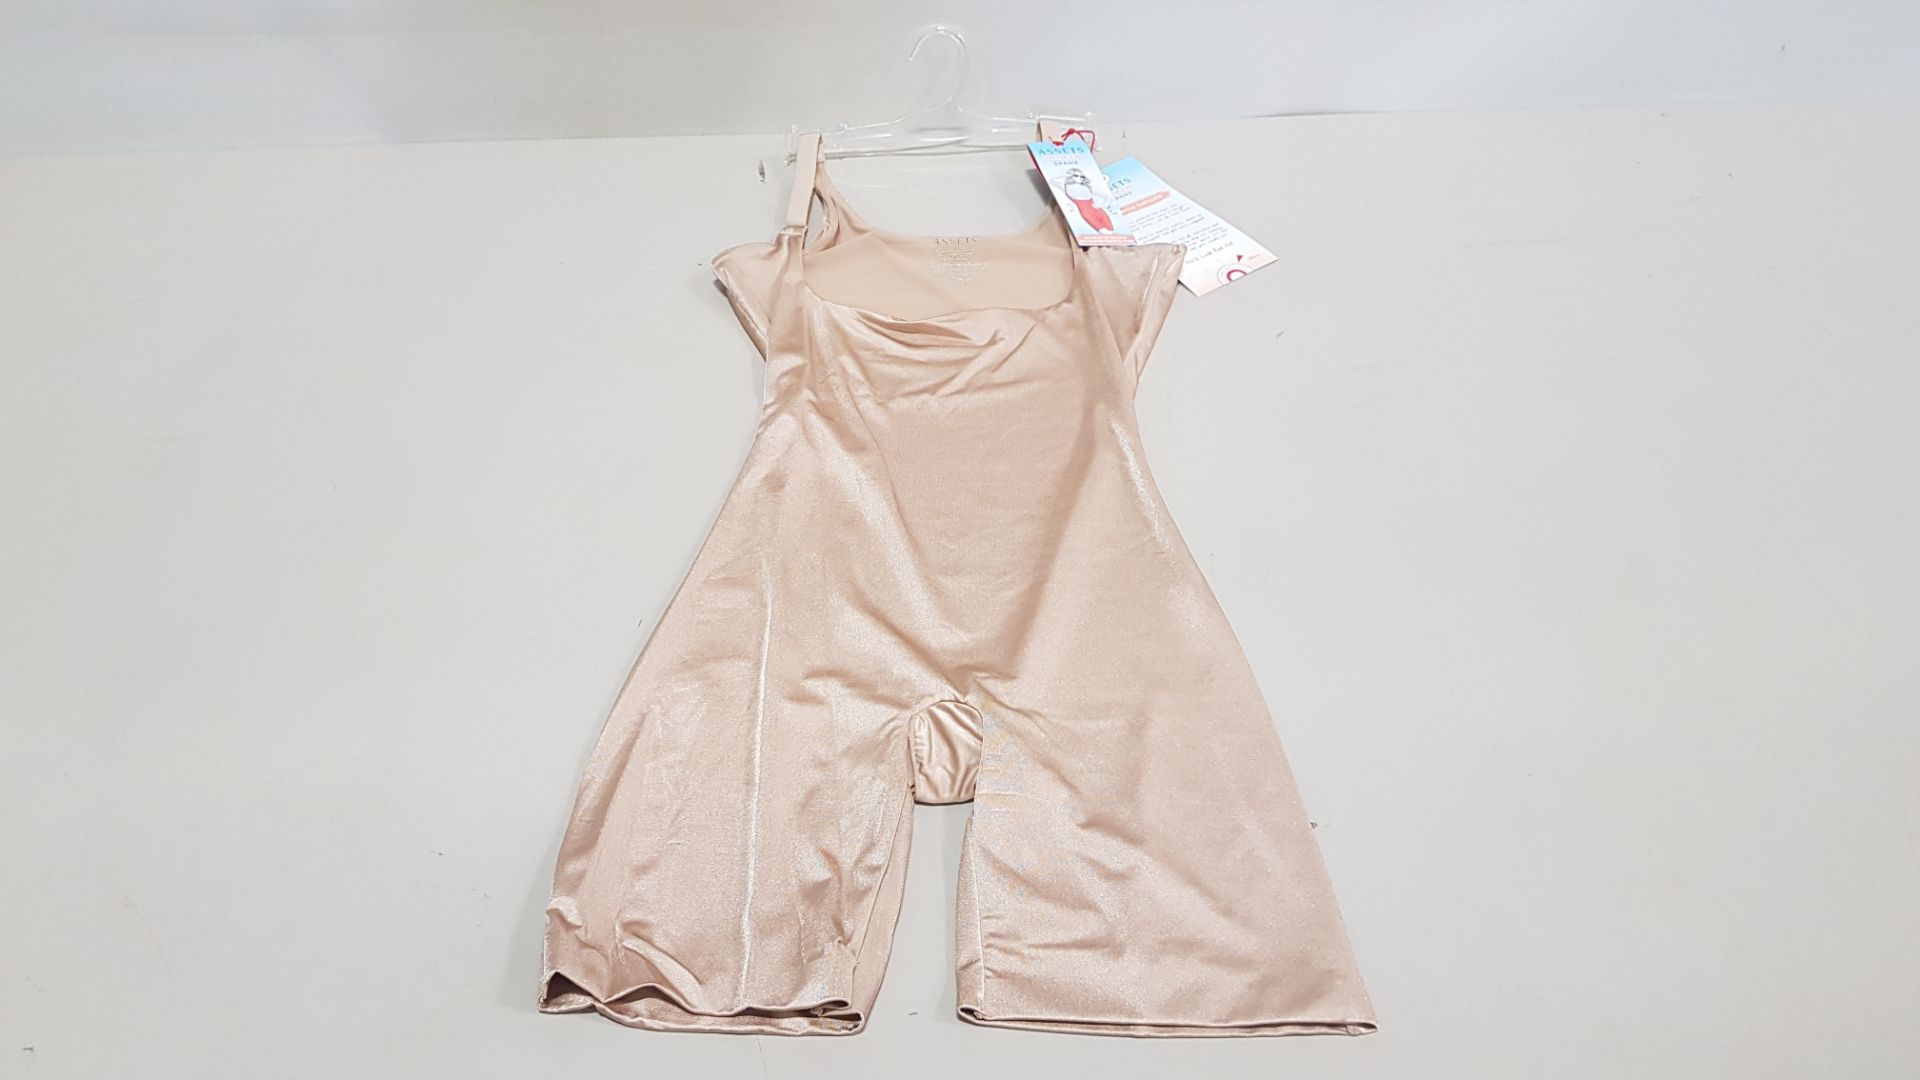 20 X BRAND NEW SPANX NUDE OPEN BUST MID THIGH BODY SHAPER SIZE LARGE